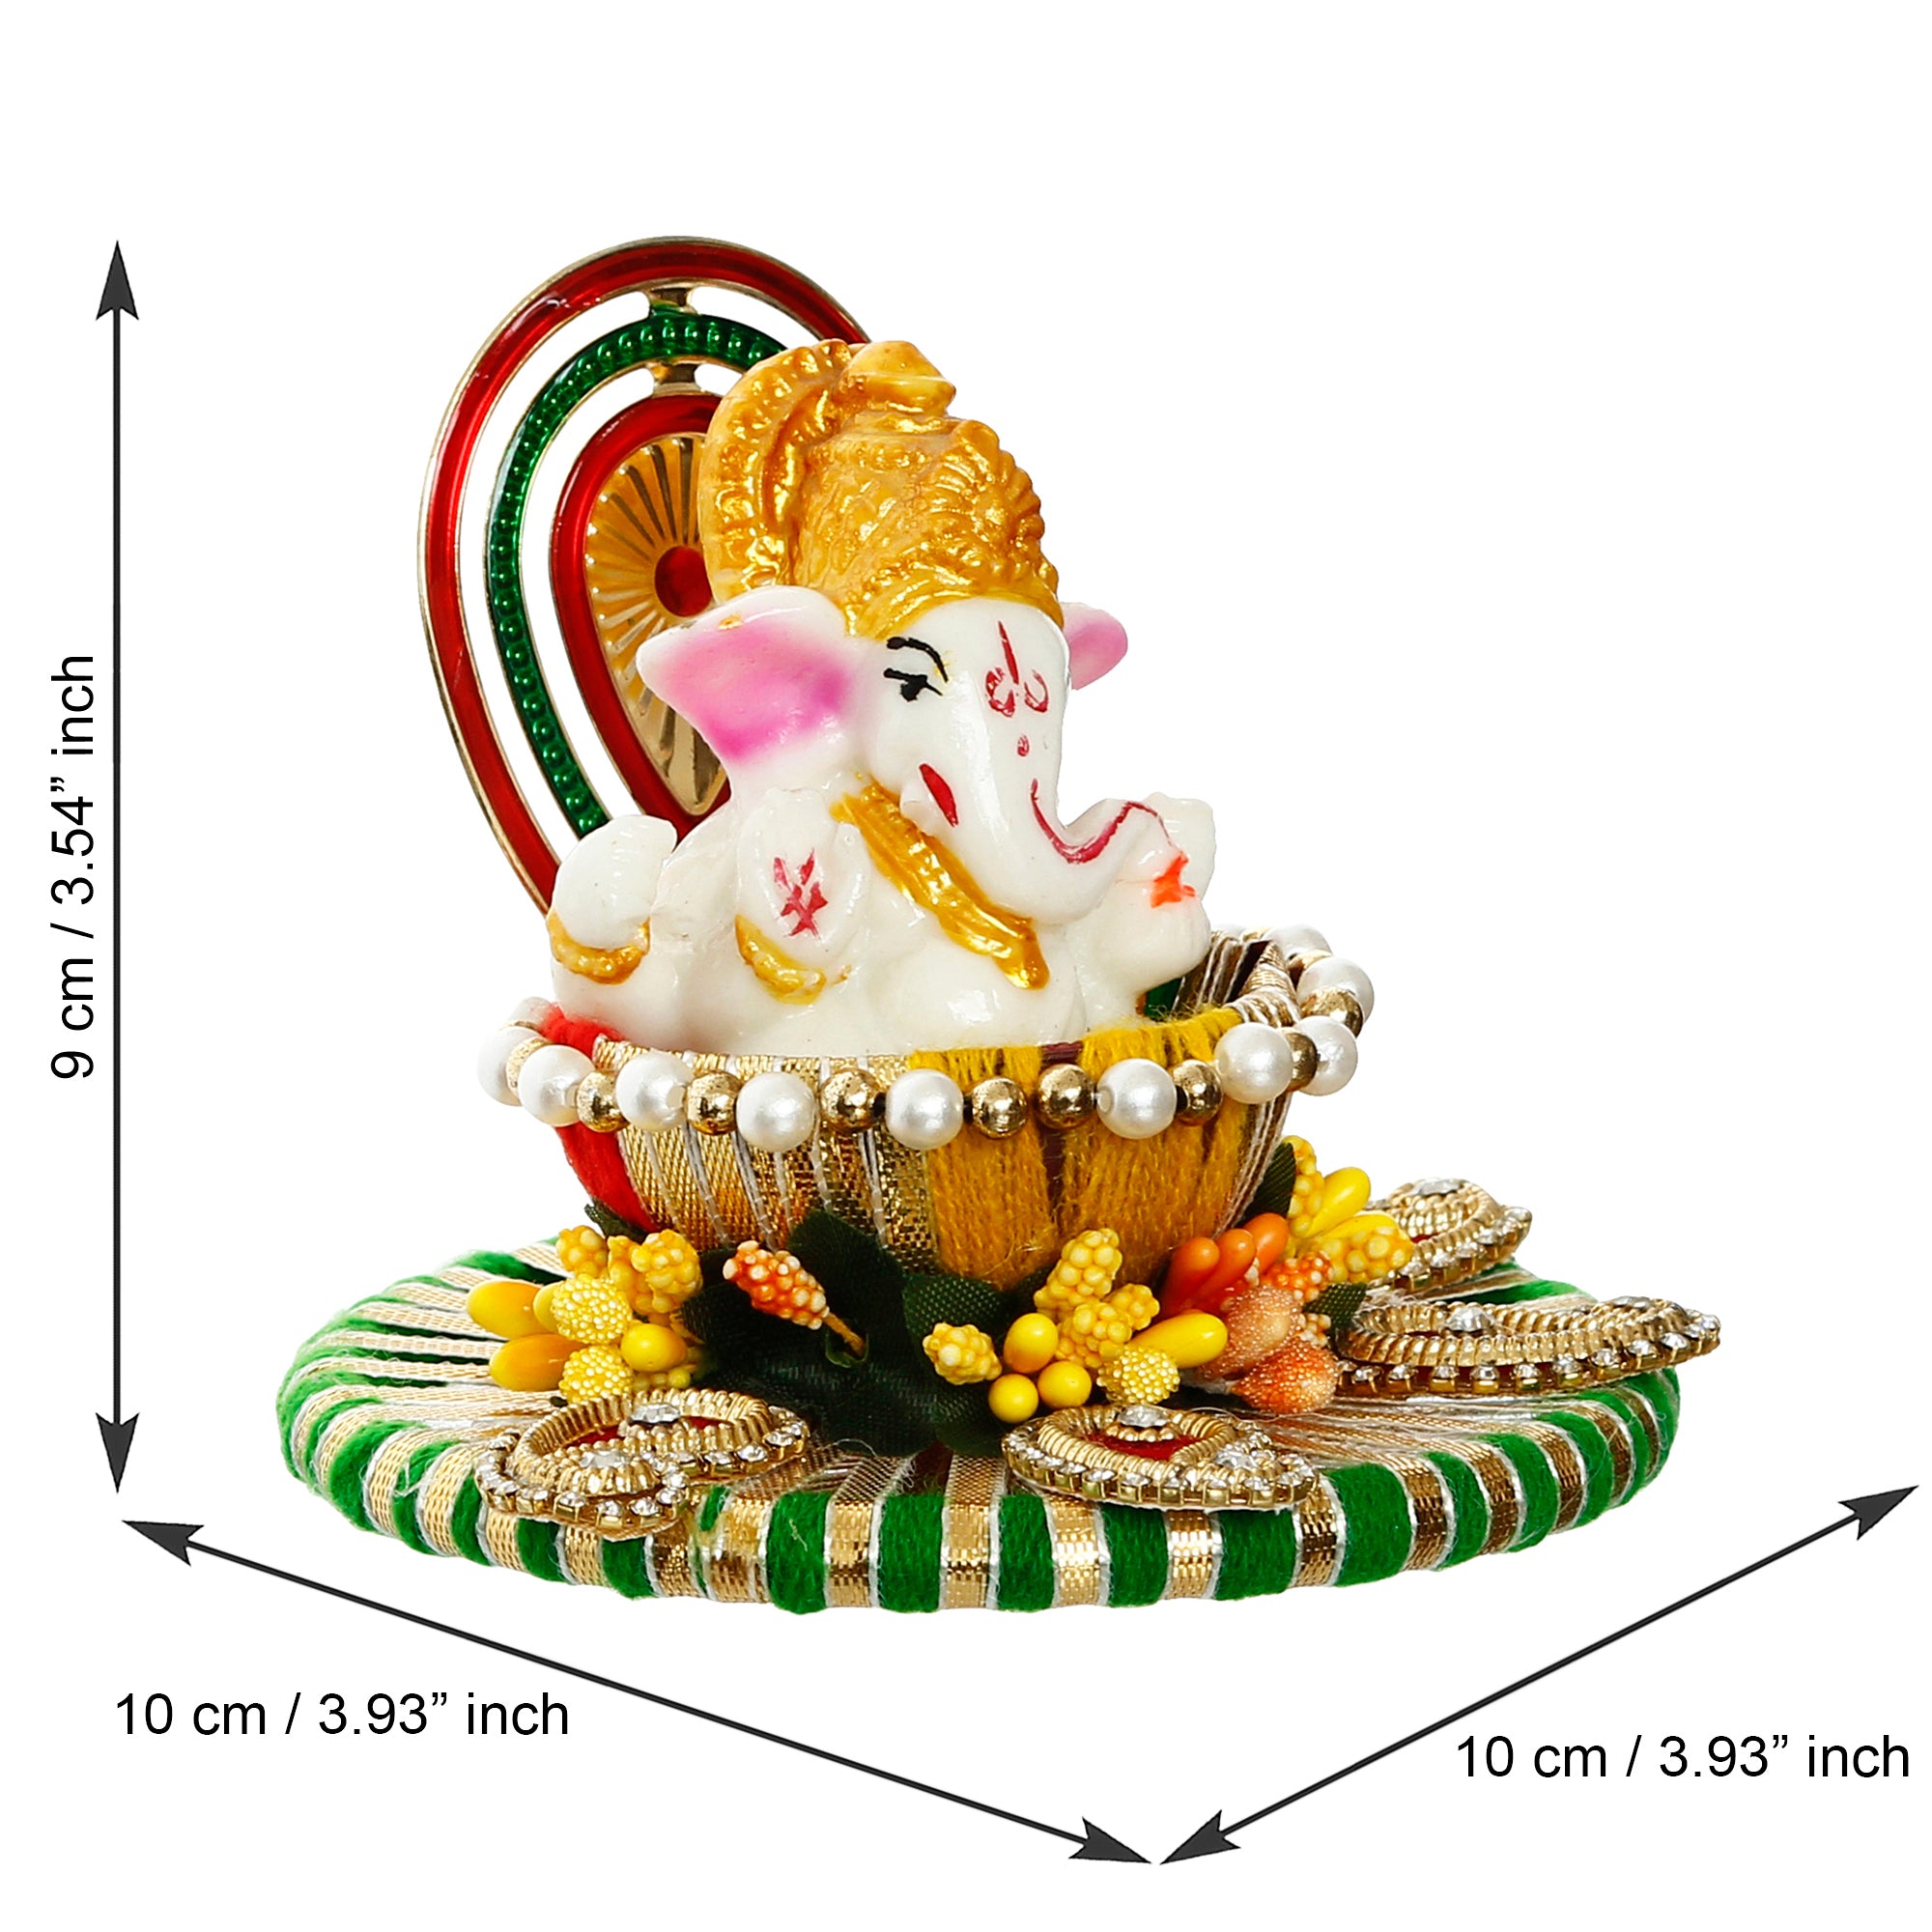 Lord Ganesha Idol on Decorative Handcrafted Singhasan for Home/Temple/Office/Car Dashboard 3